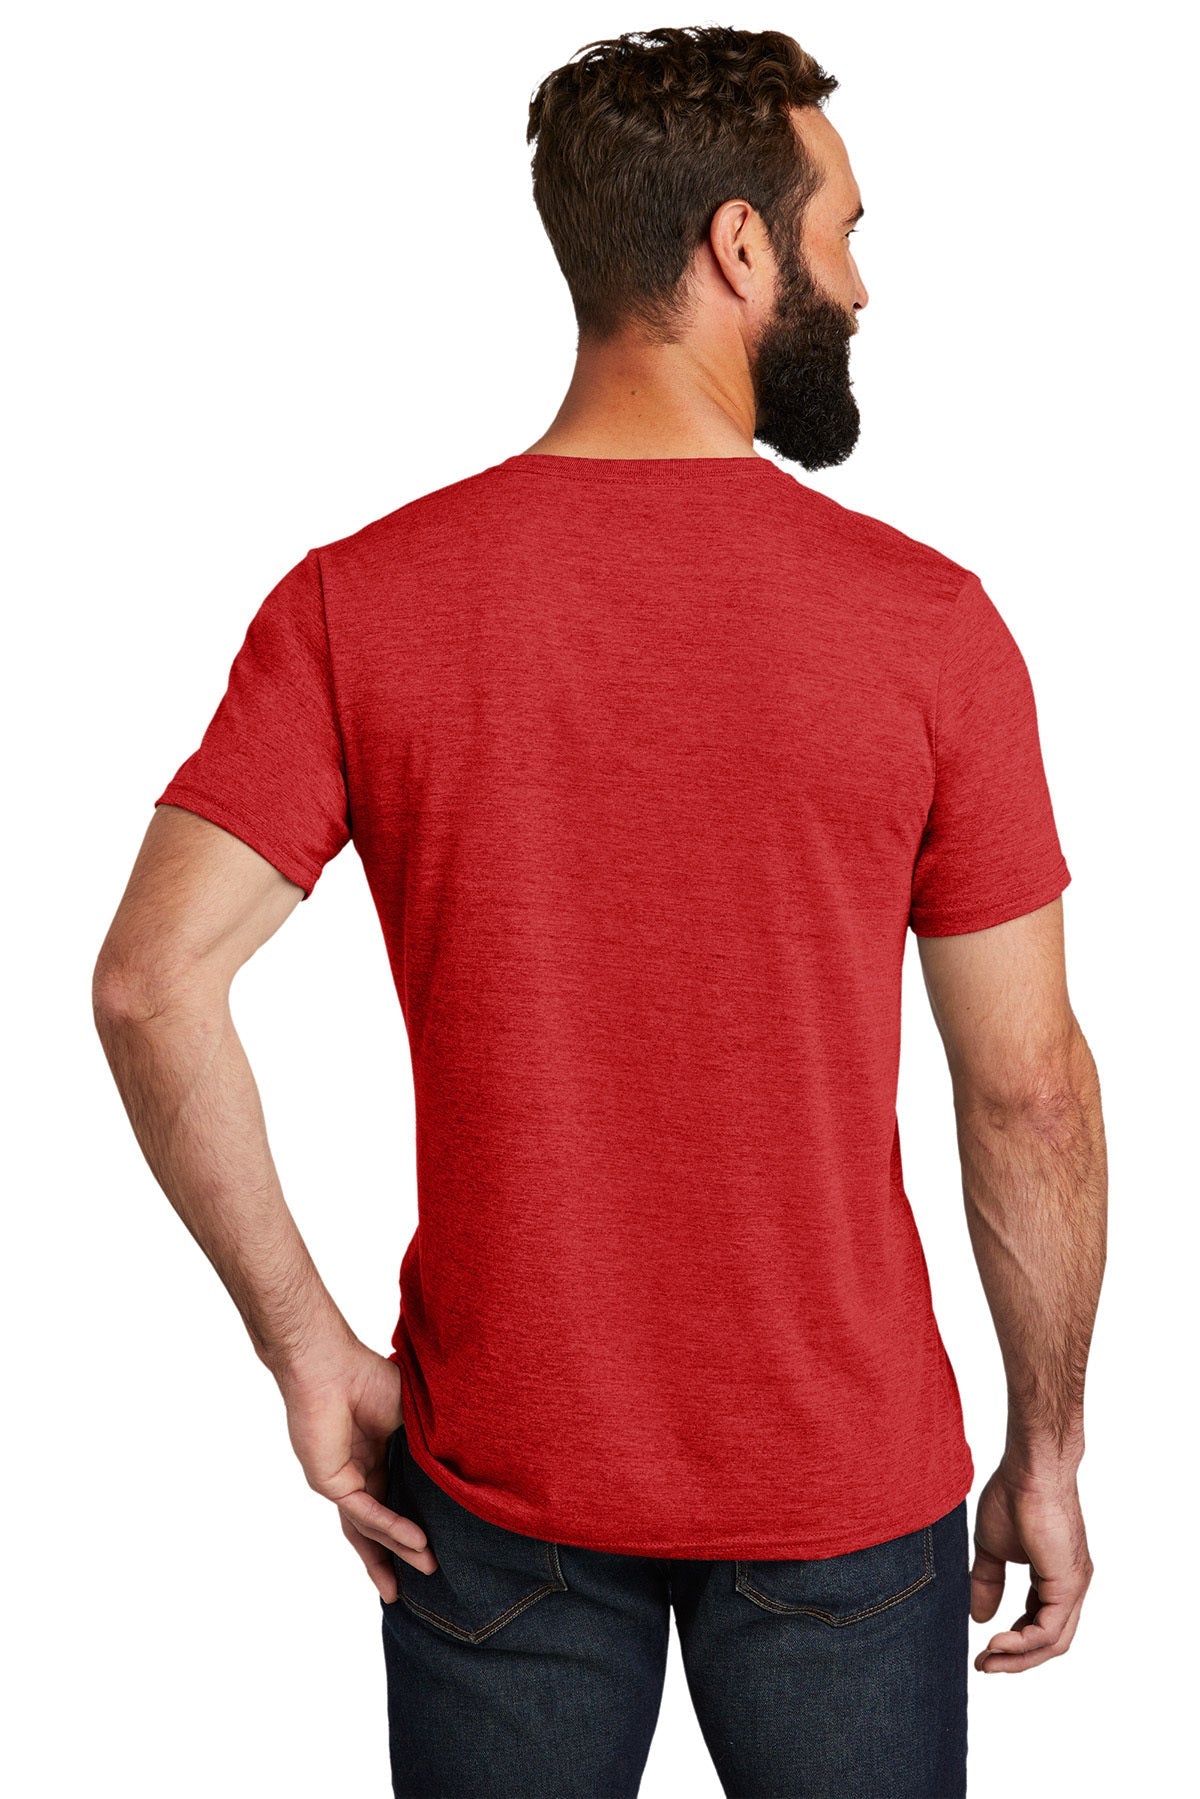 Allmade Unisex Tri-Blend Customized V-Neck Tee, Rise Up Red